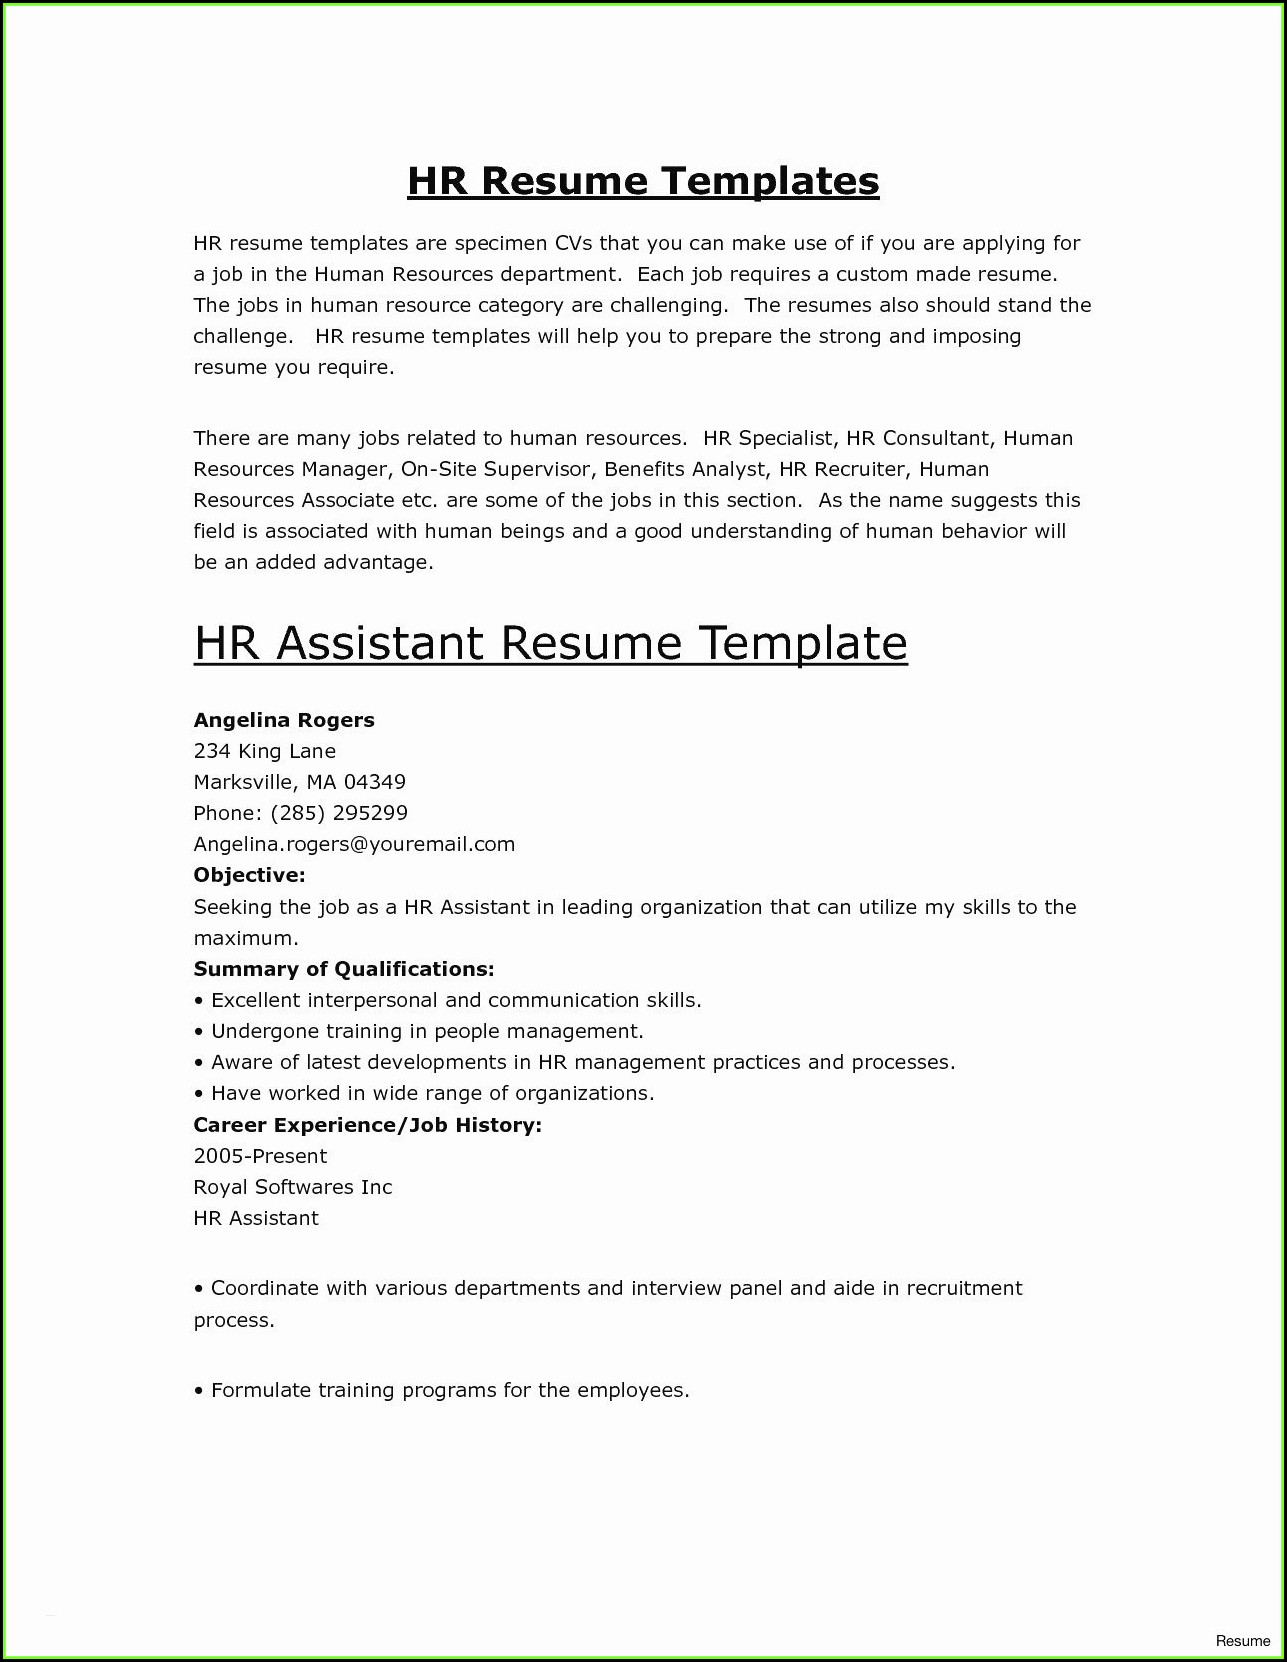 Highest Rated Resume Templates